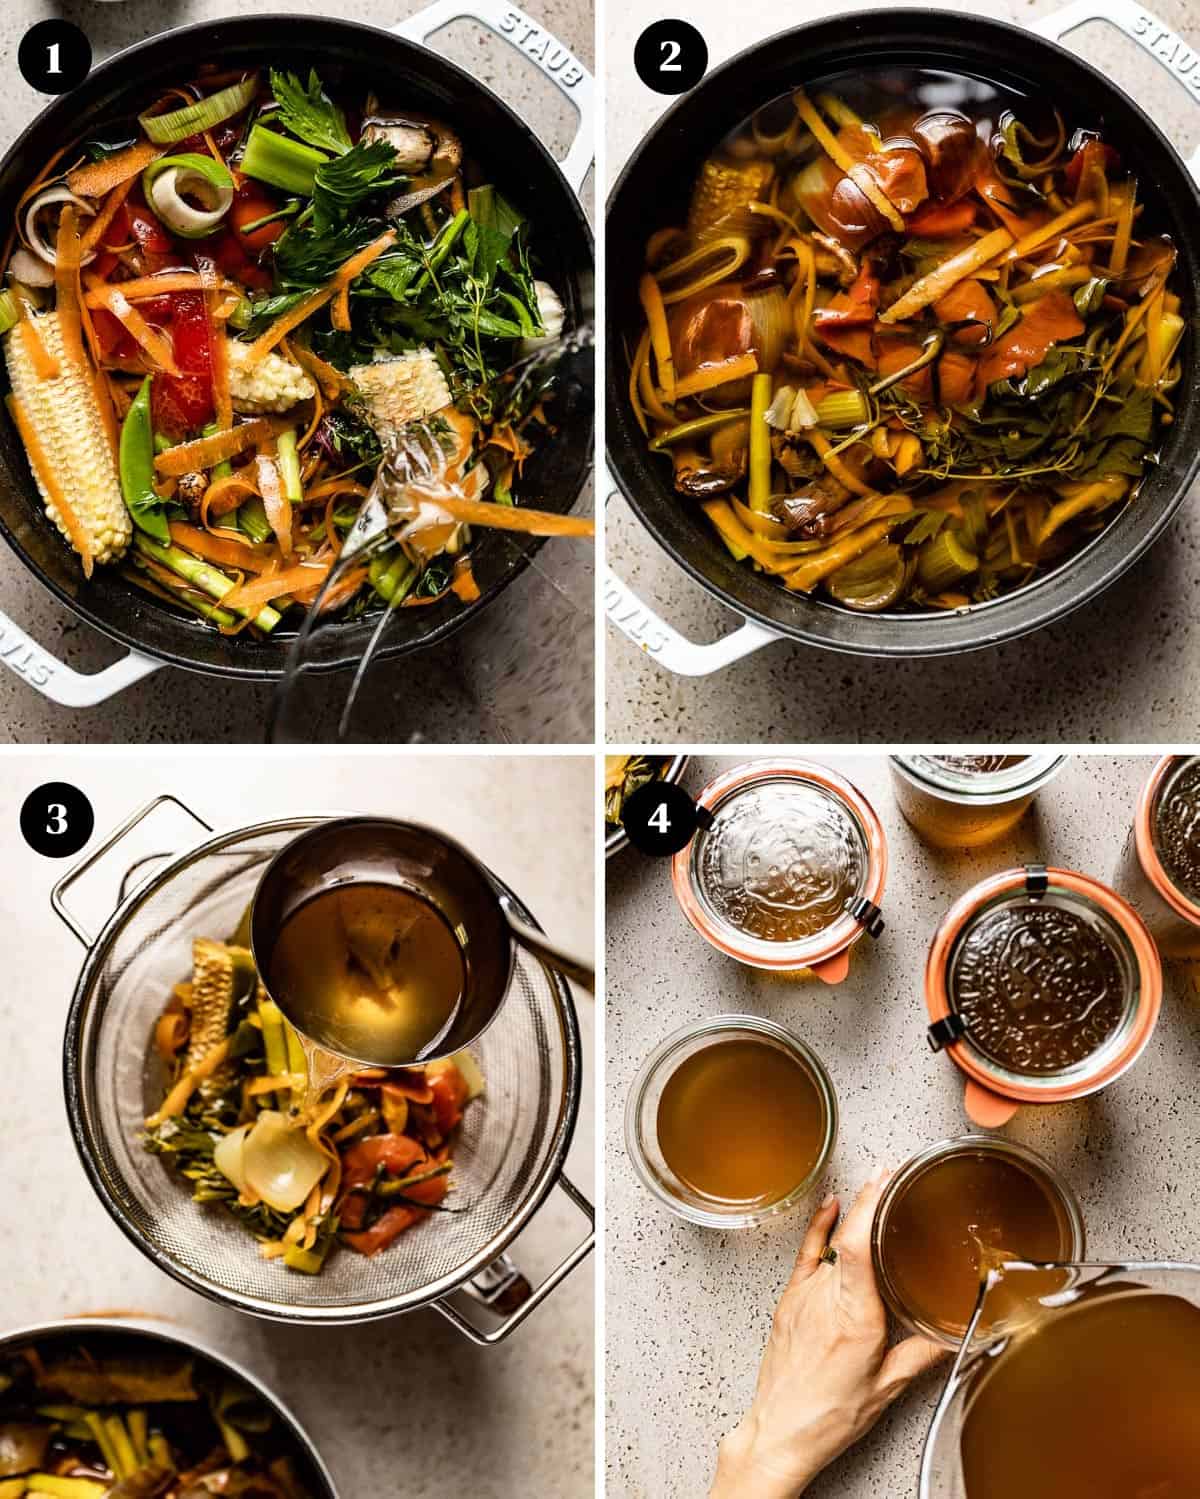 A collage of images showinghow to make veggie broth from scraps.